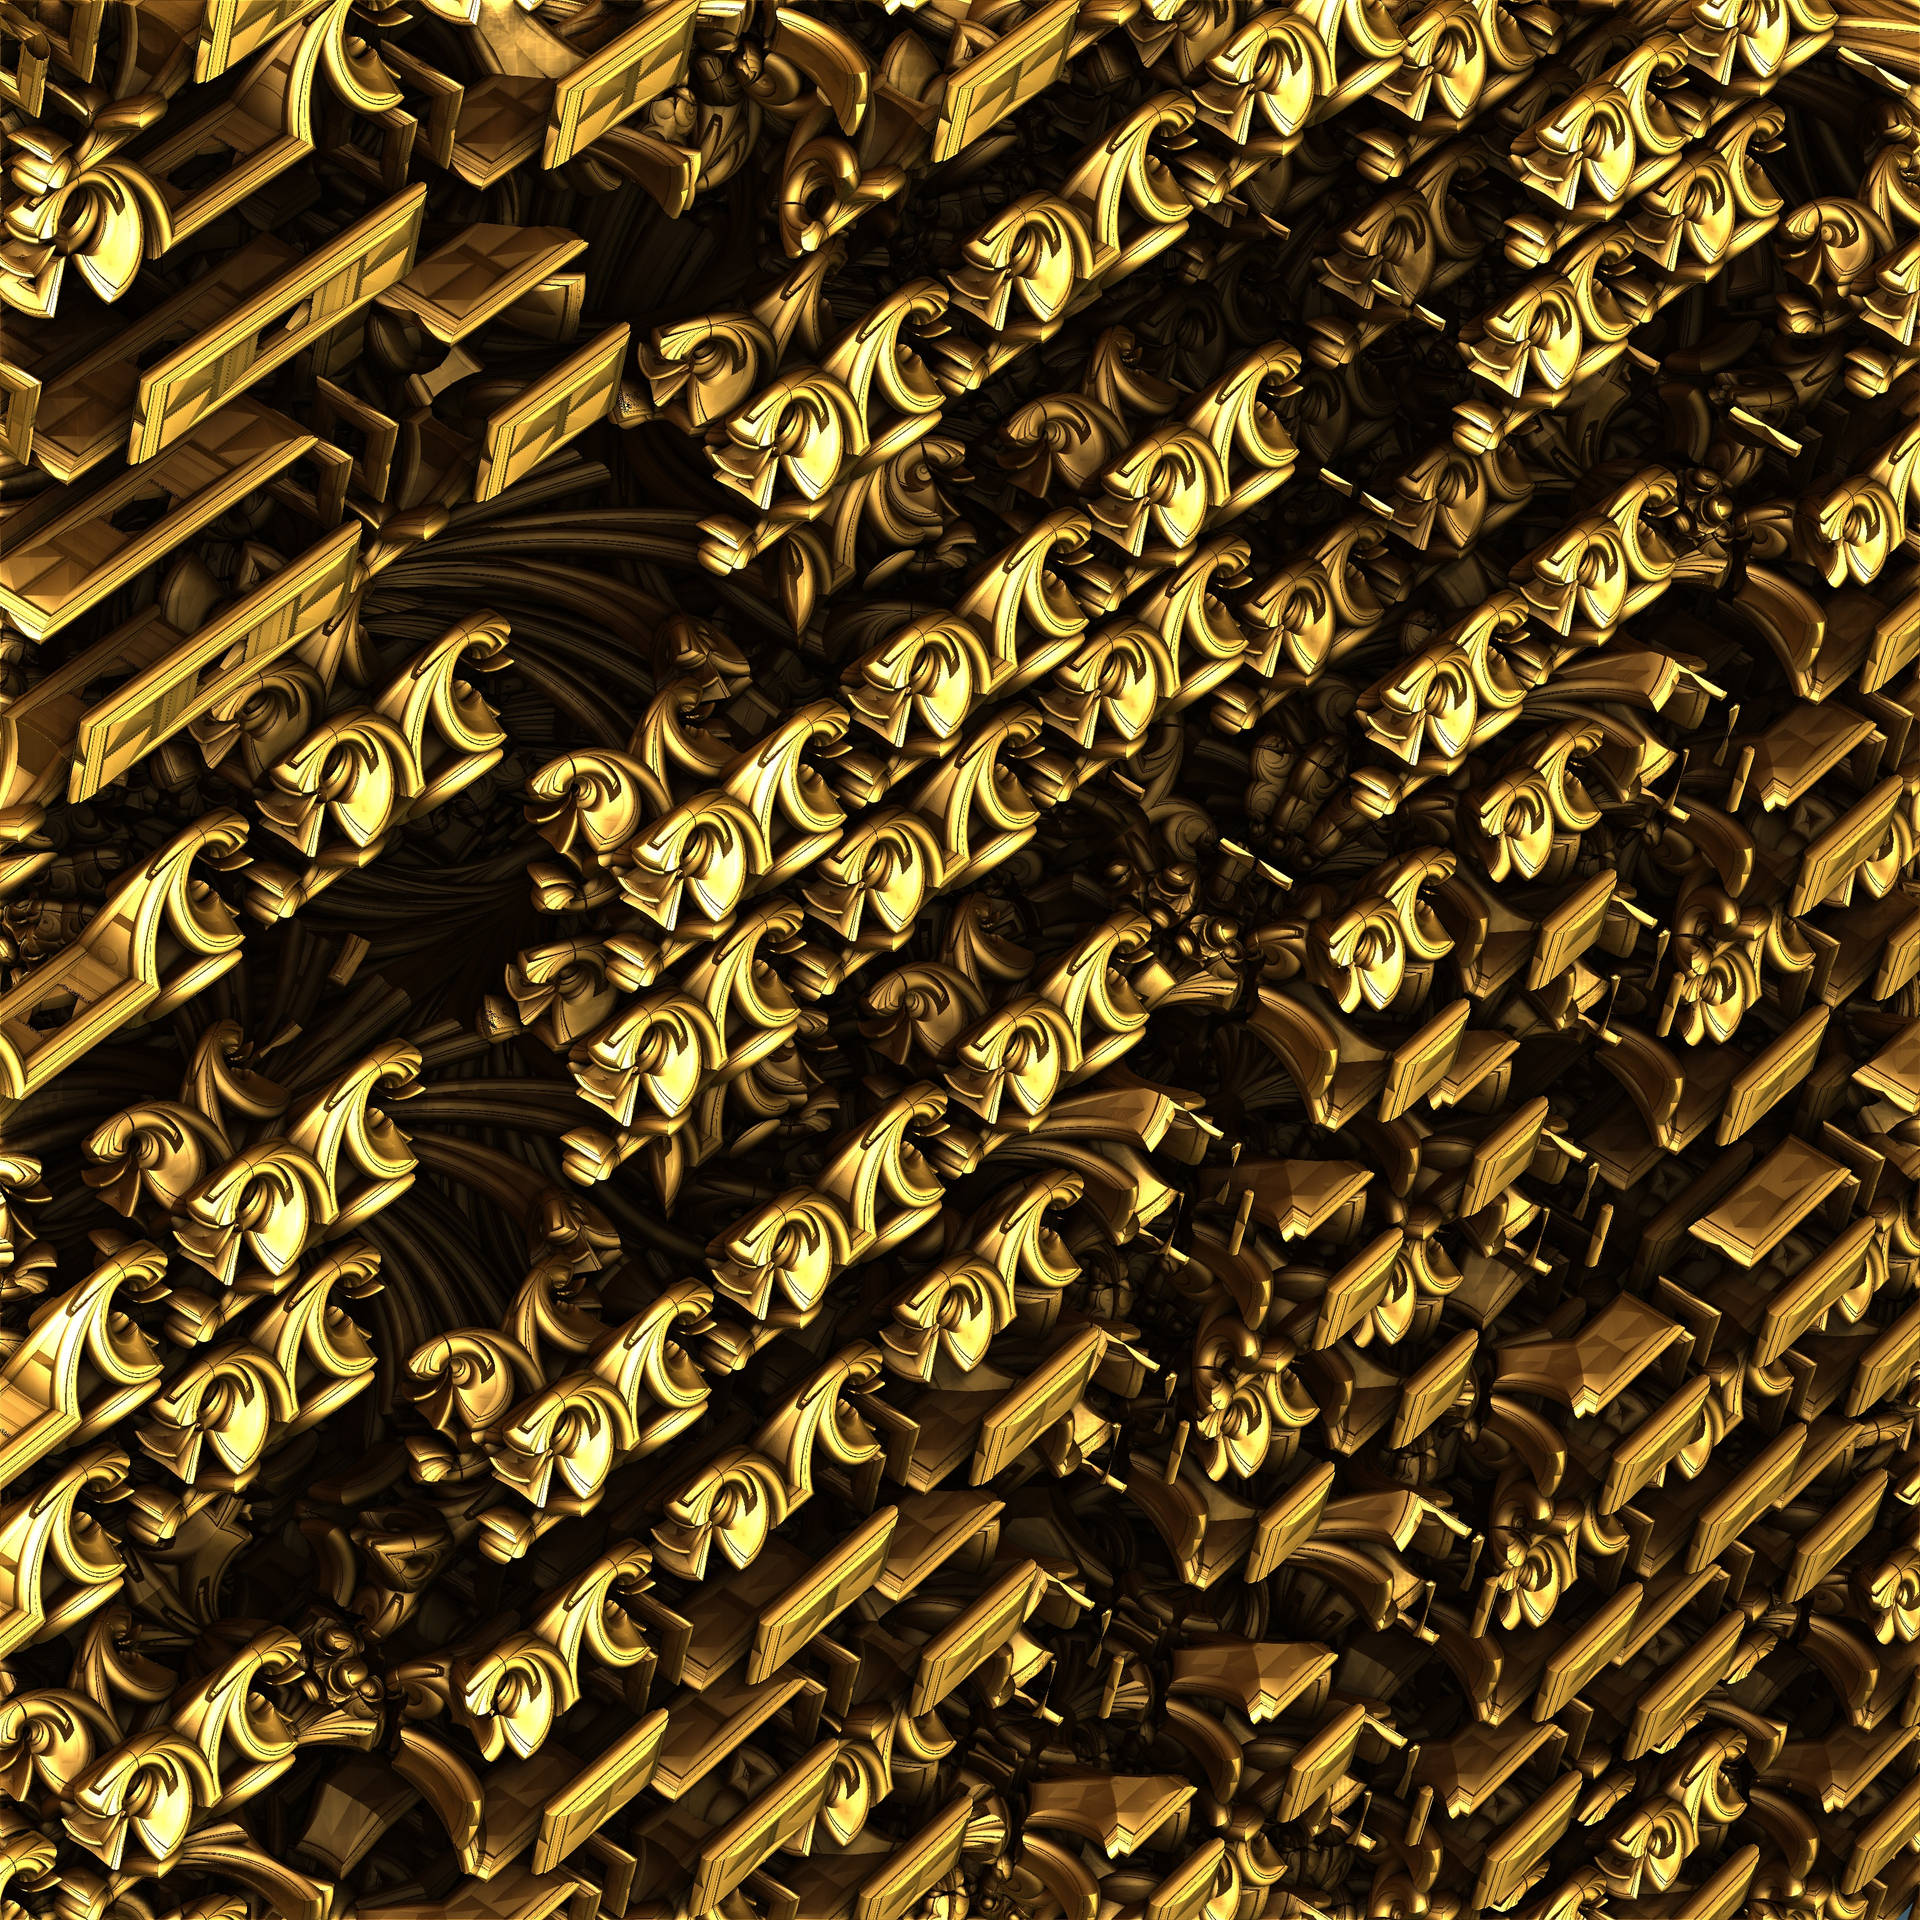 Gold 3072X3072 Wallpaper and Background Image